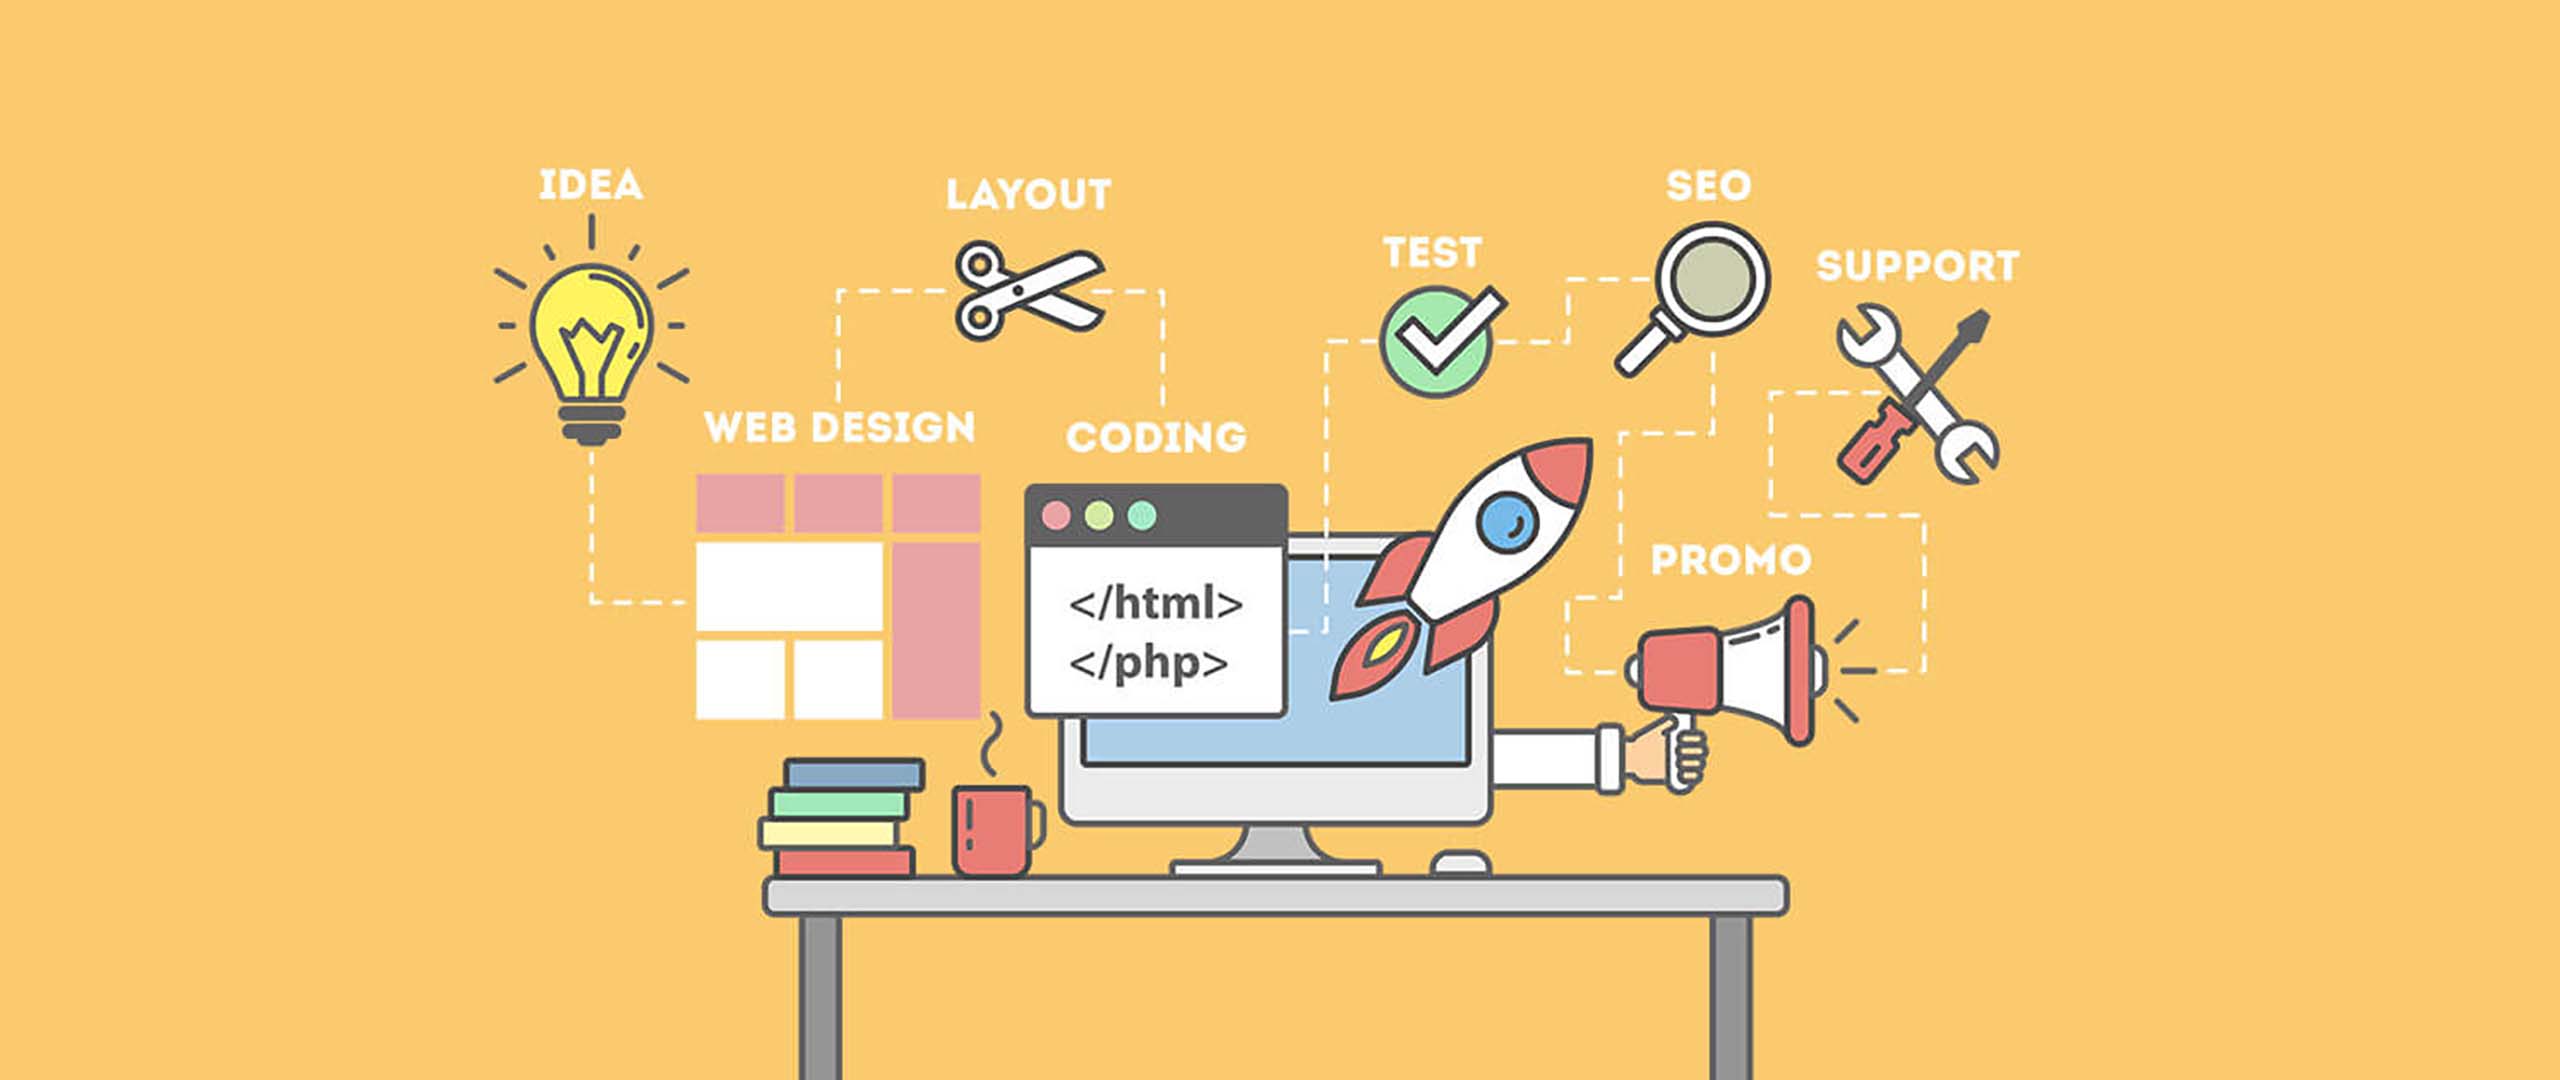 Affordable Web Design Services for Small Businesses